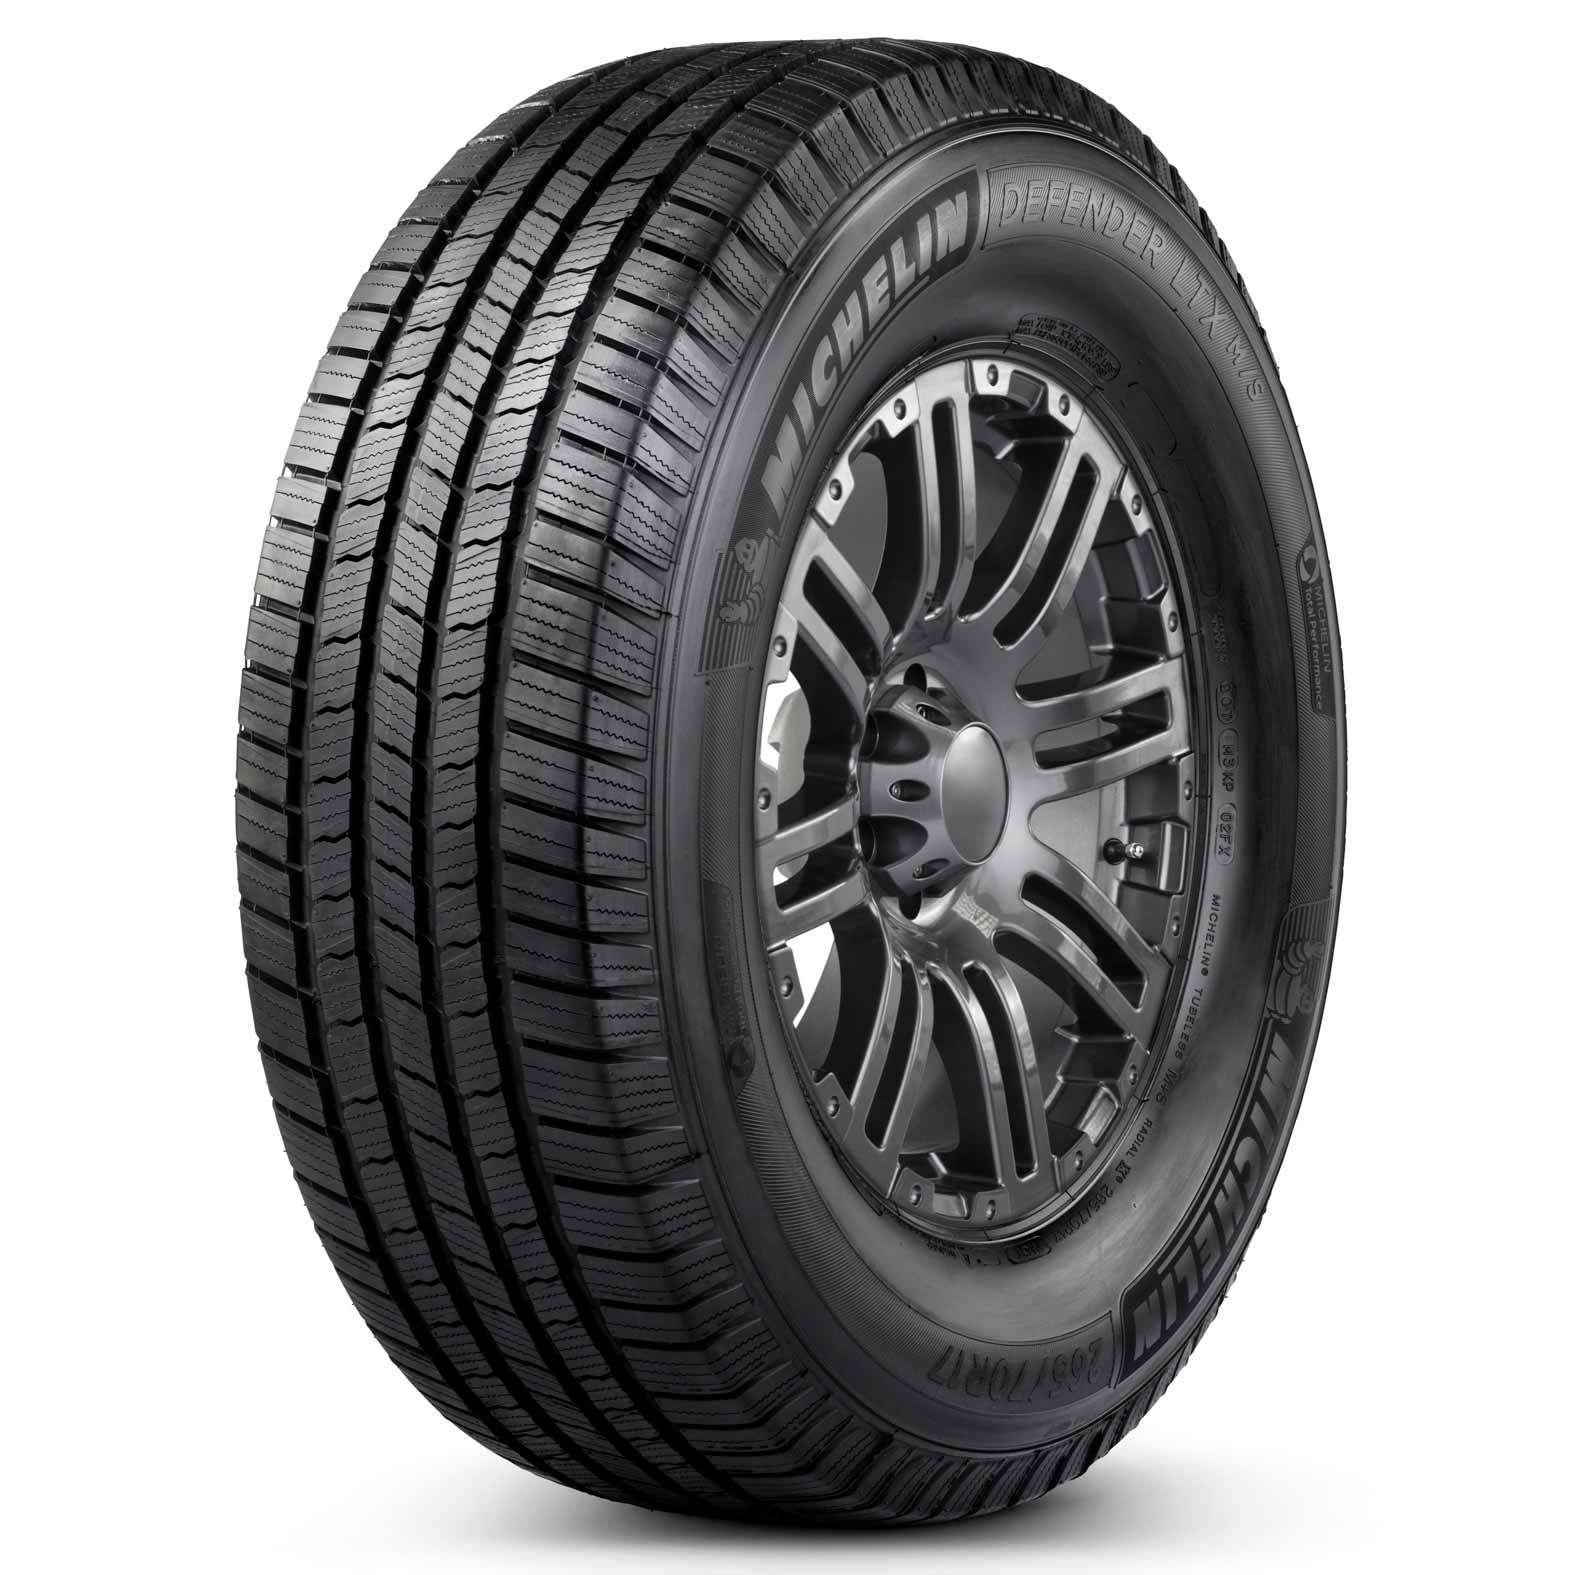 michelin-defender-a-s-tires-passenger-performance-all-season-tires